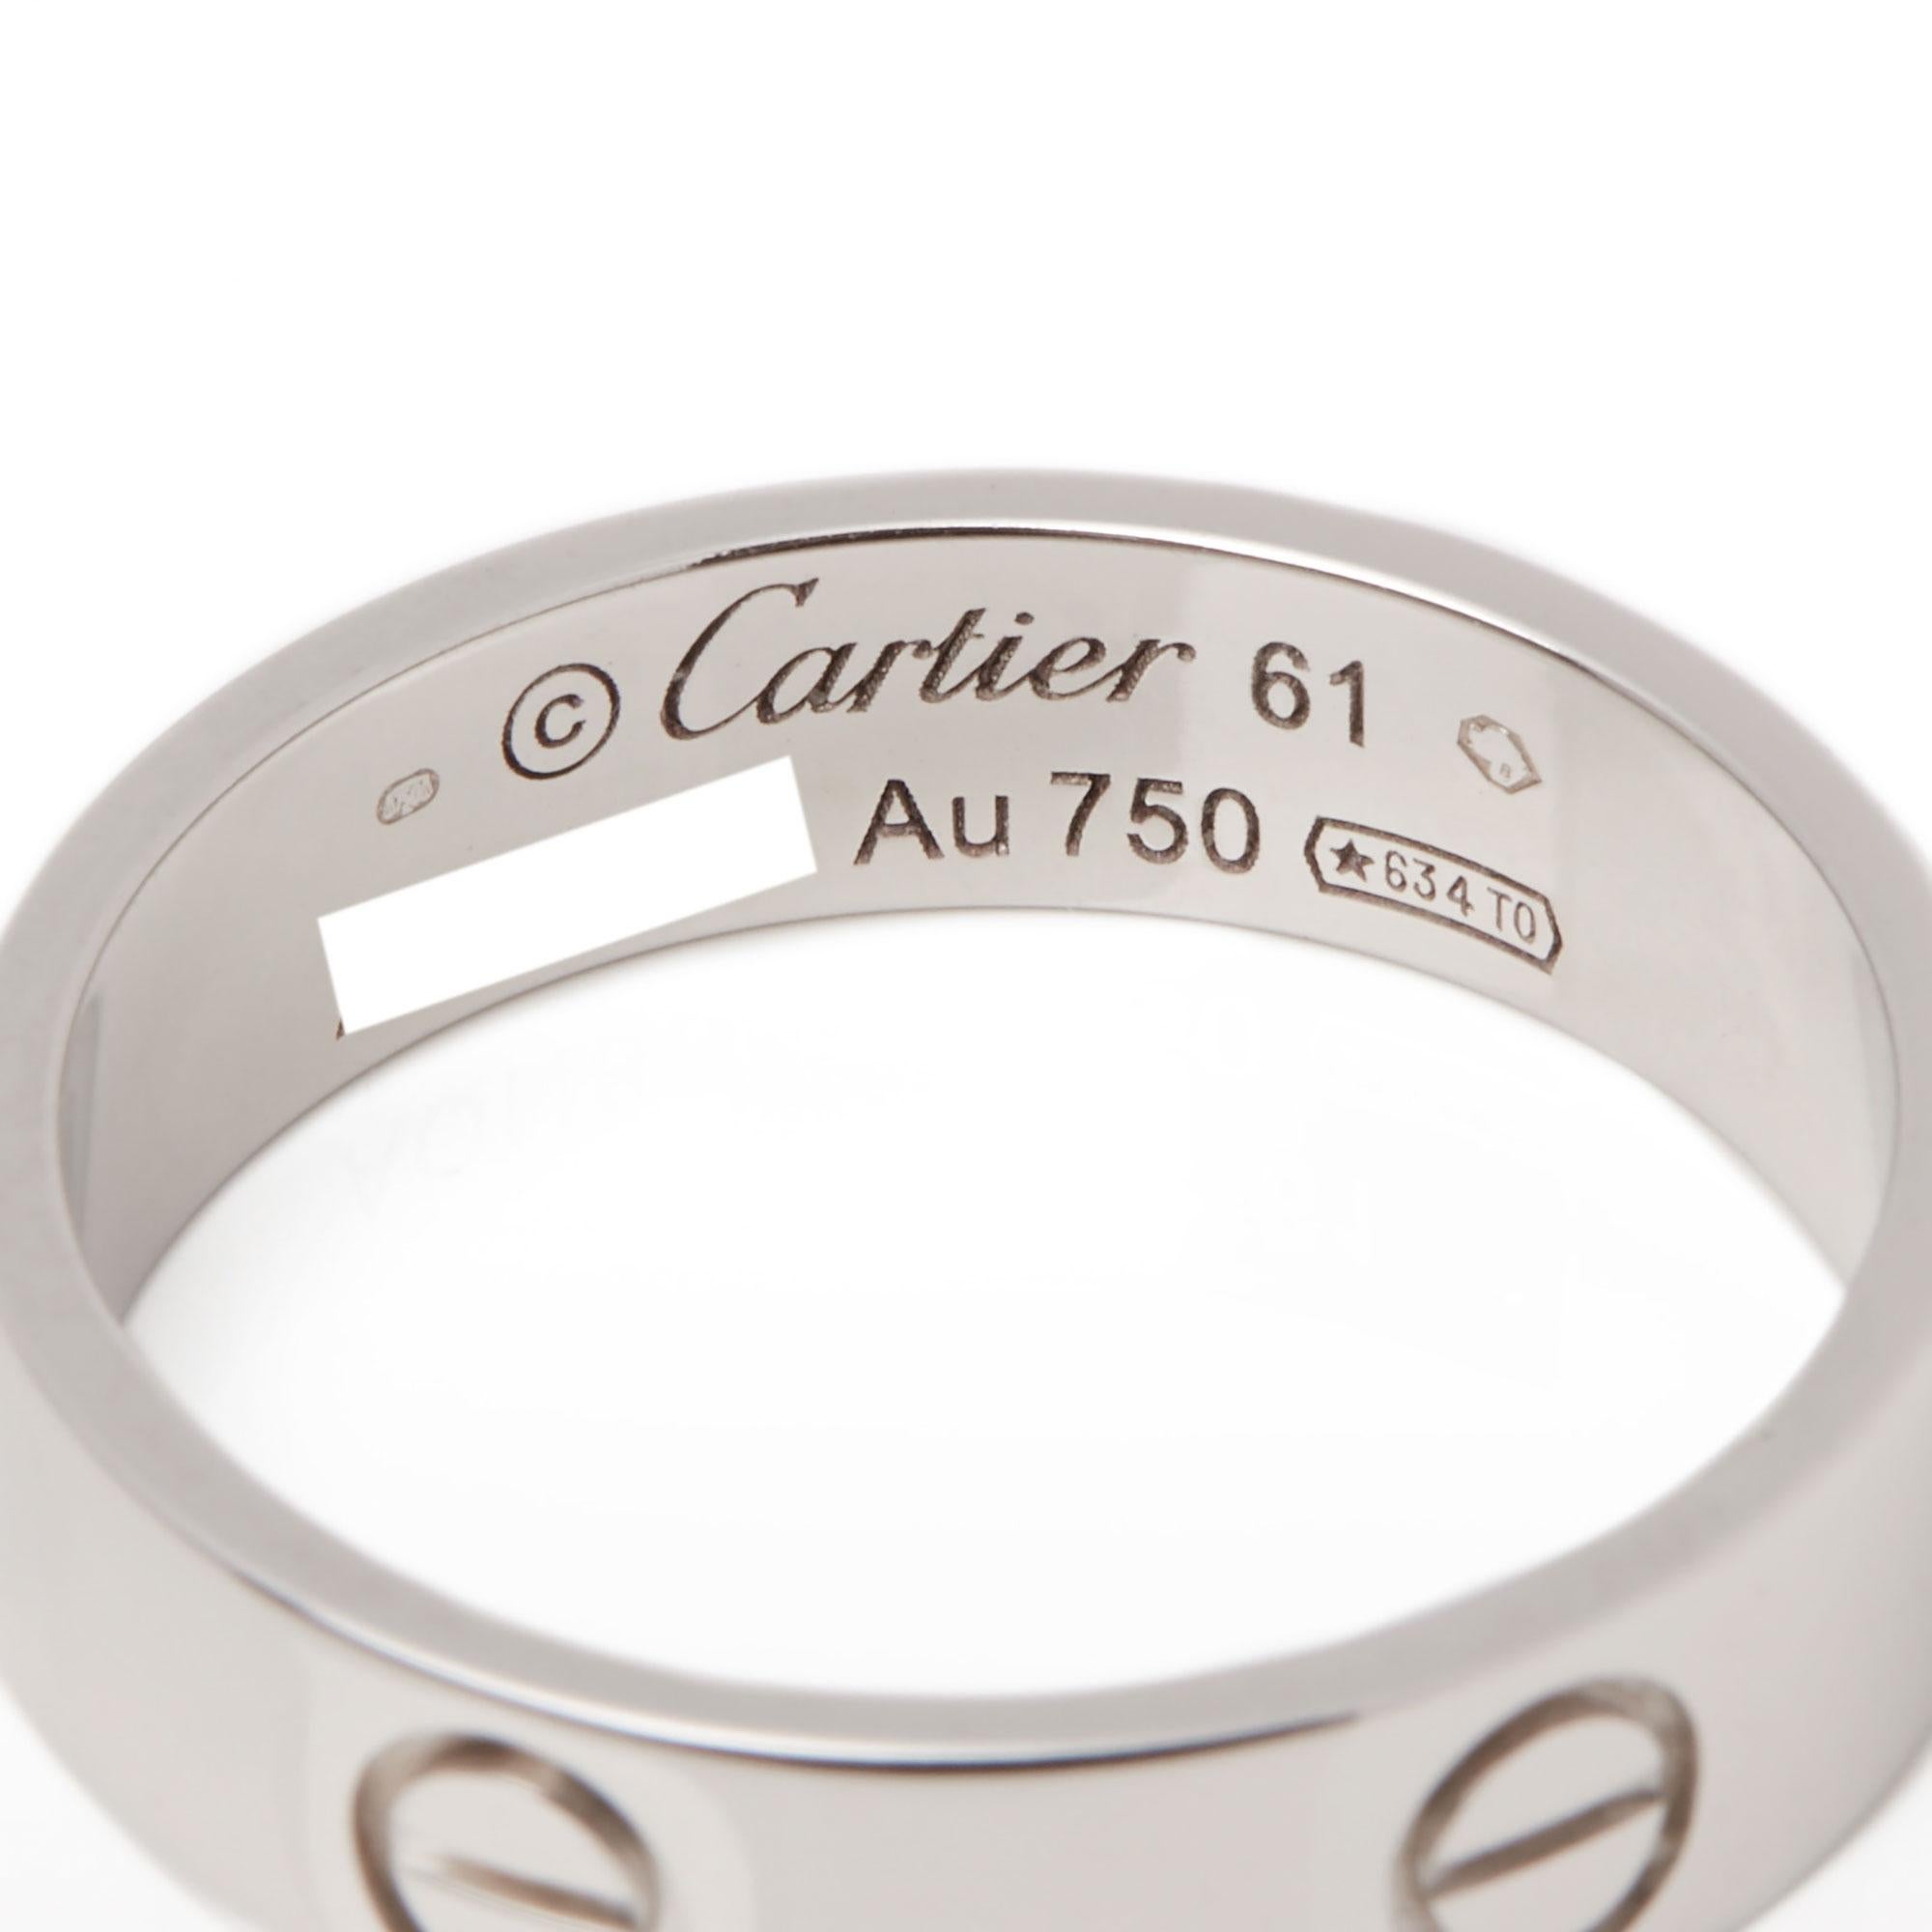 This ring by Cartier is from their Love Collection and features their iconic screw detailing set in 18ct white gold. Ring Size S 1/2, EU size 61, US size 9 1/2 Complete with Cartier box and certificate. Our Xupes reference is COMJ464 should you need